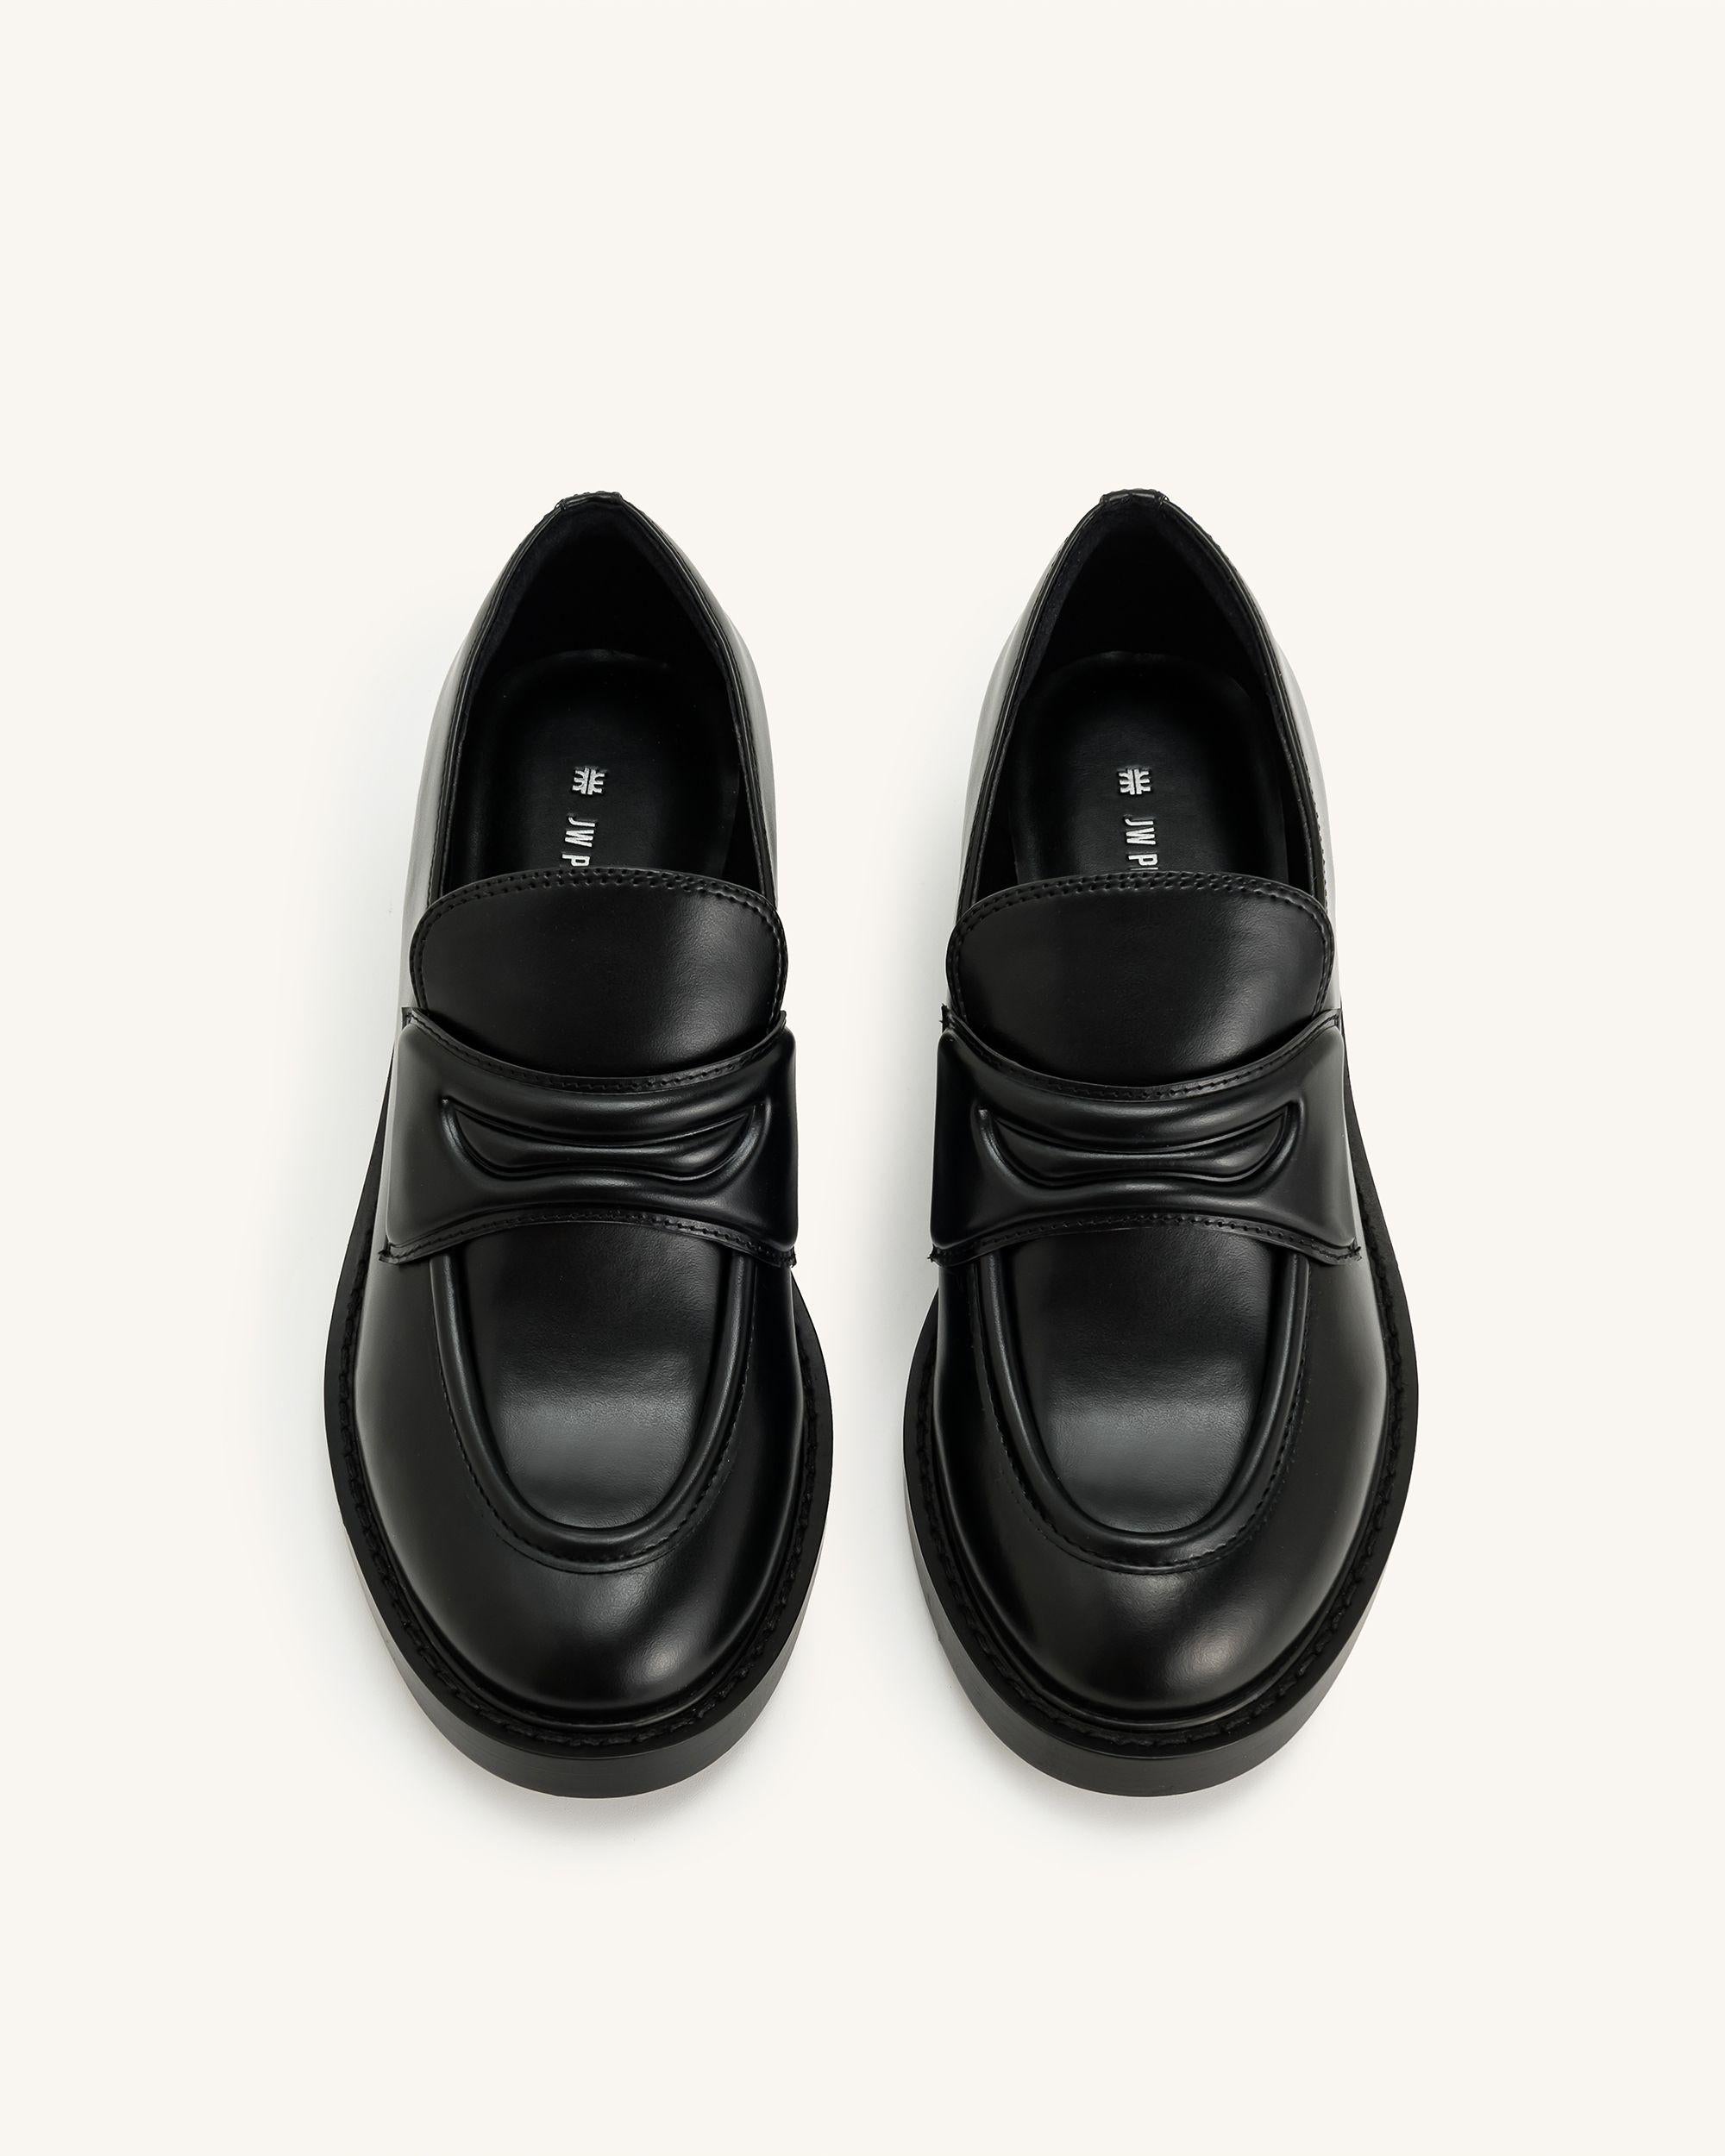 Micah Chunky Loafer - Black